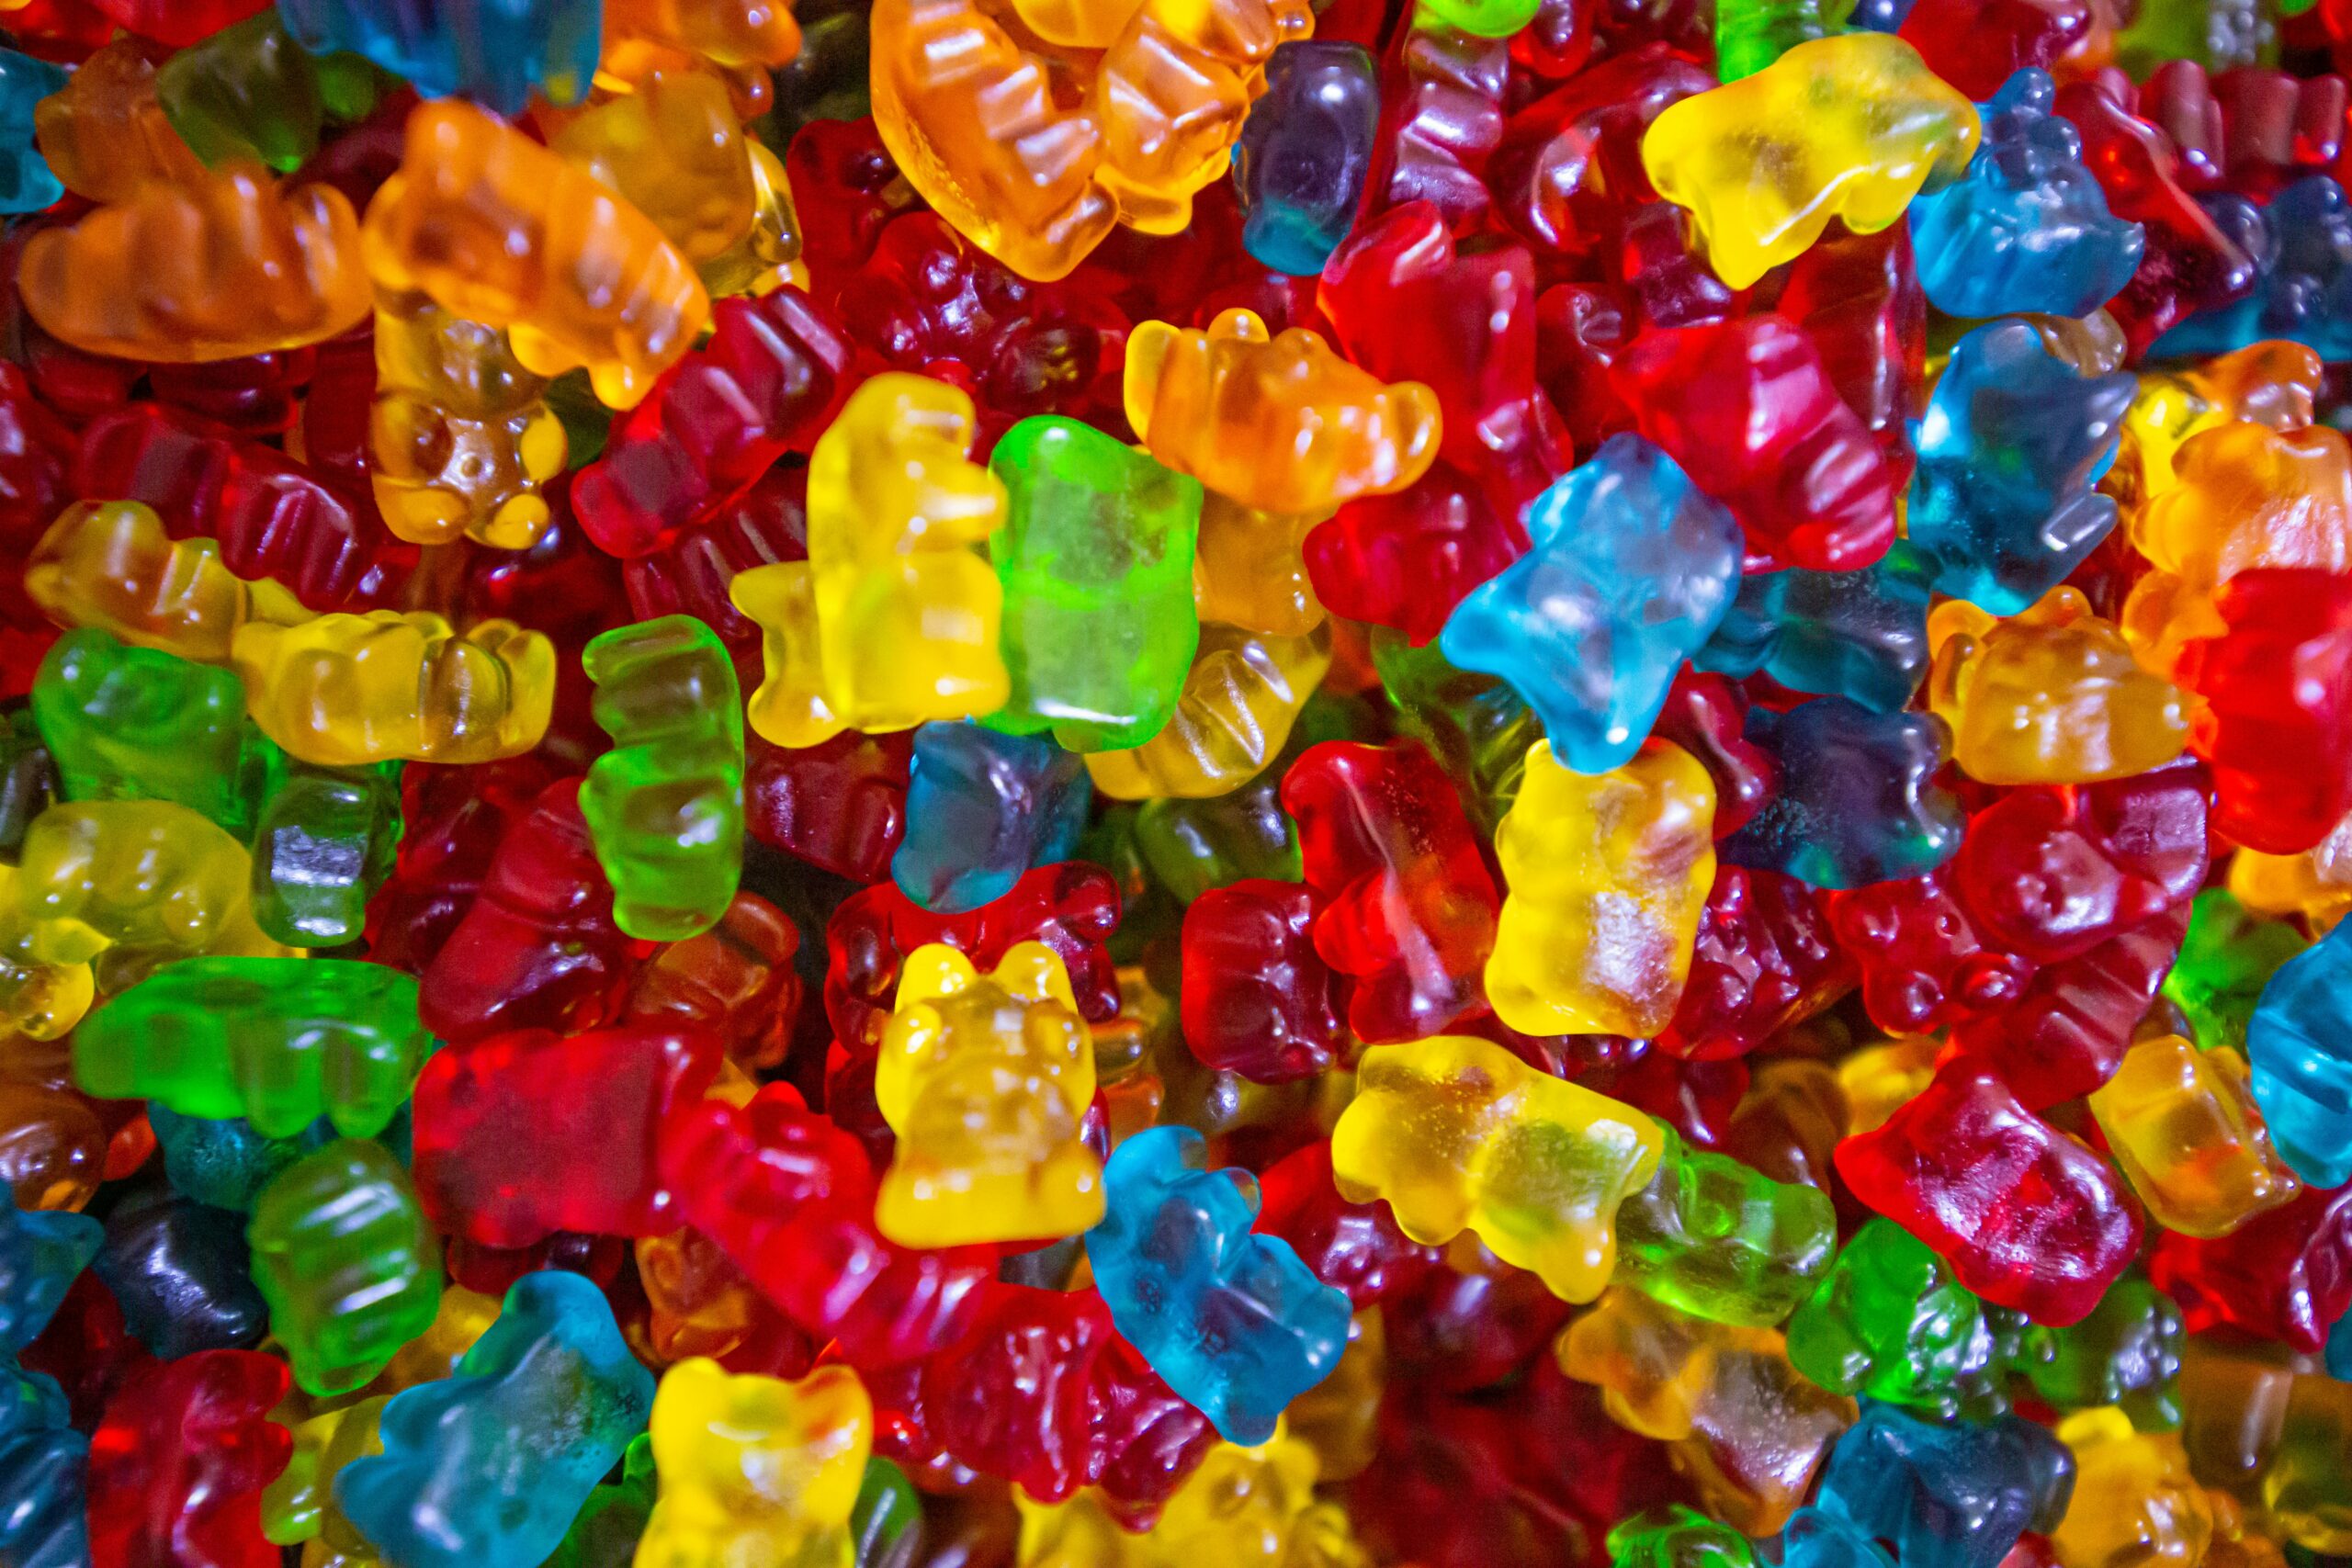 The Valentine's Day Candy Salad is so easy to make and inexpensive. Pictured: Gummy bears